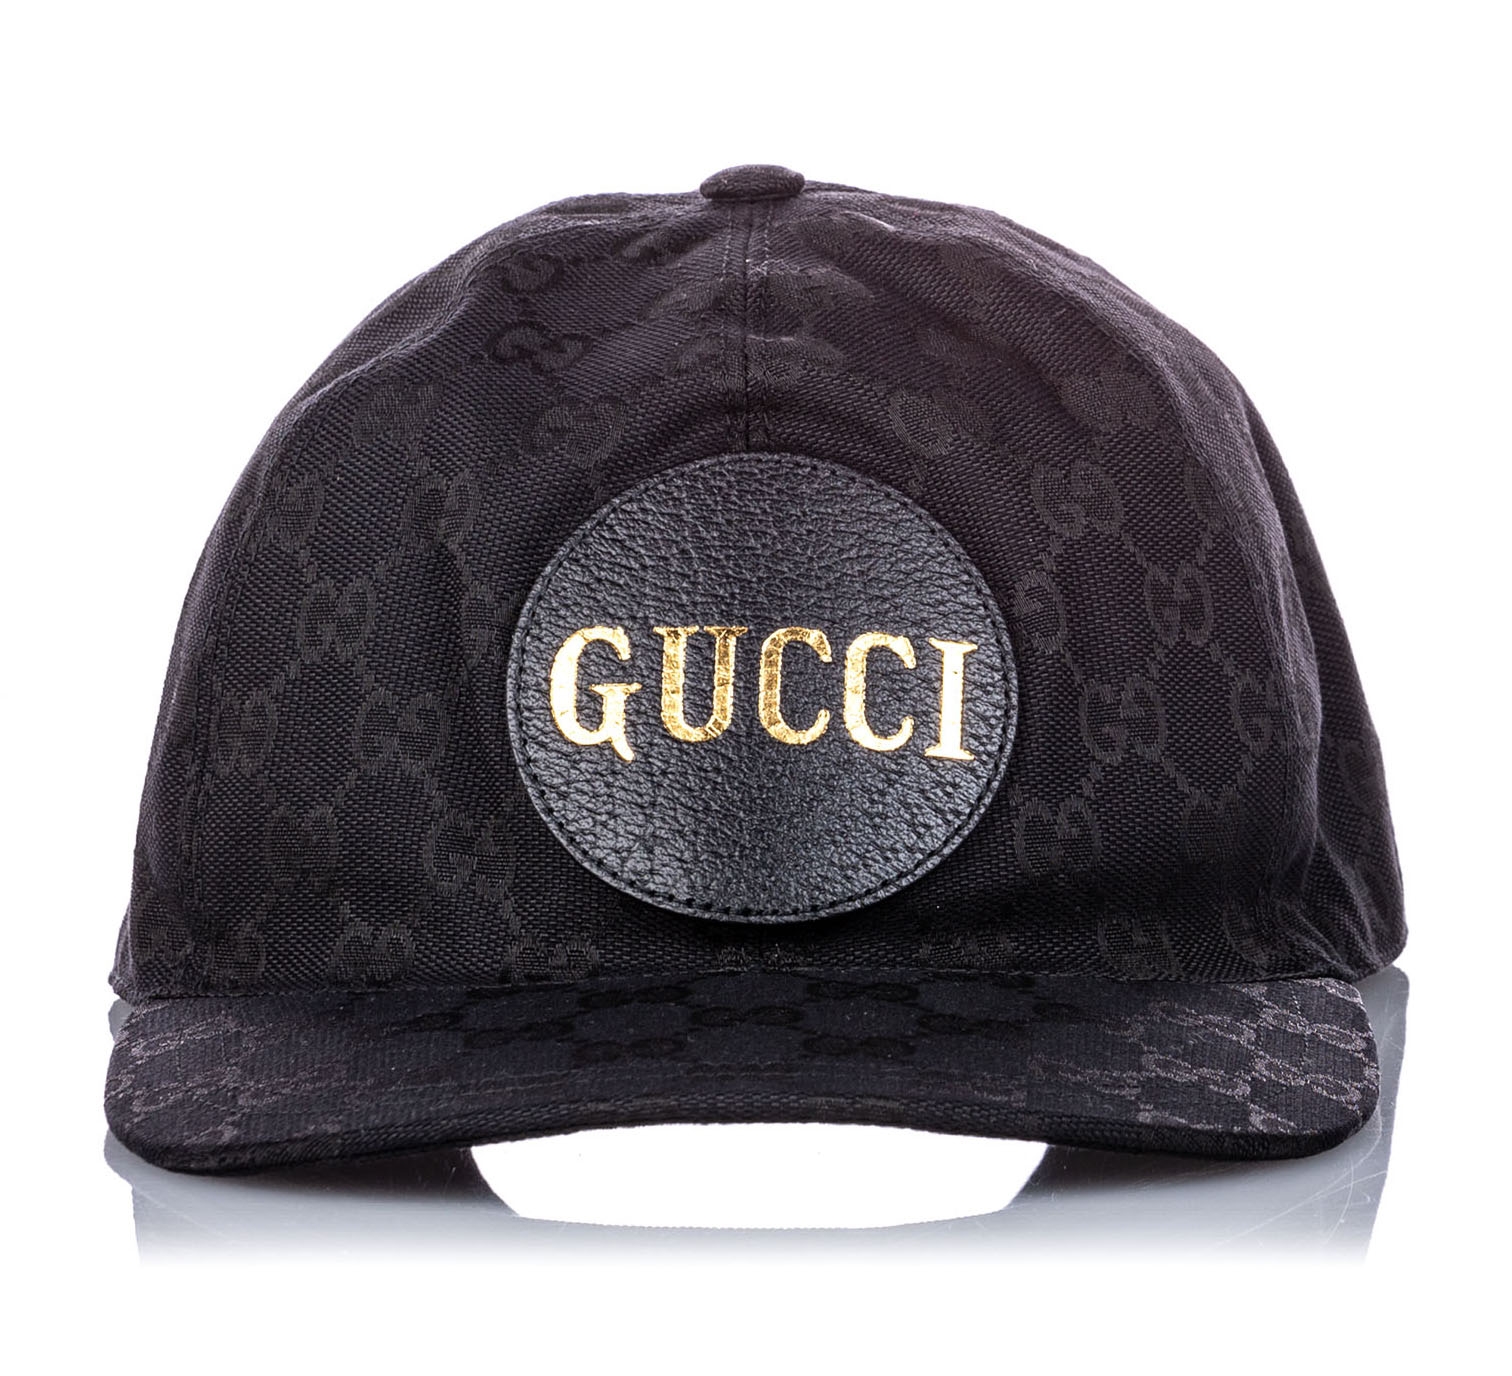 Shop Gucci Black Hats - Top-Selling Styles